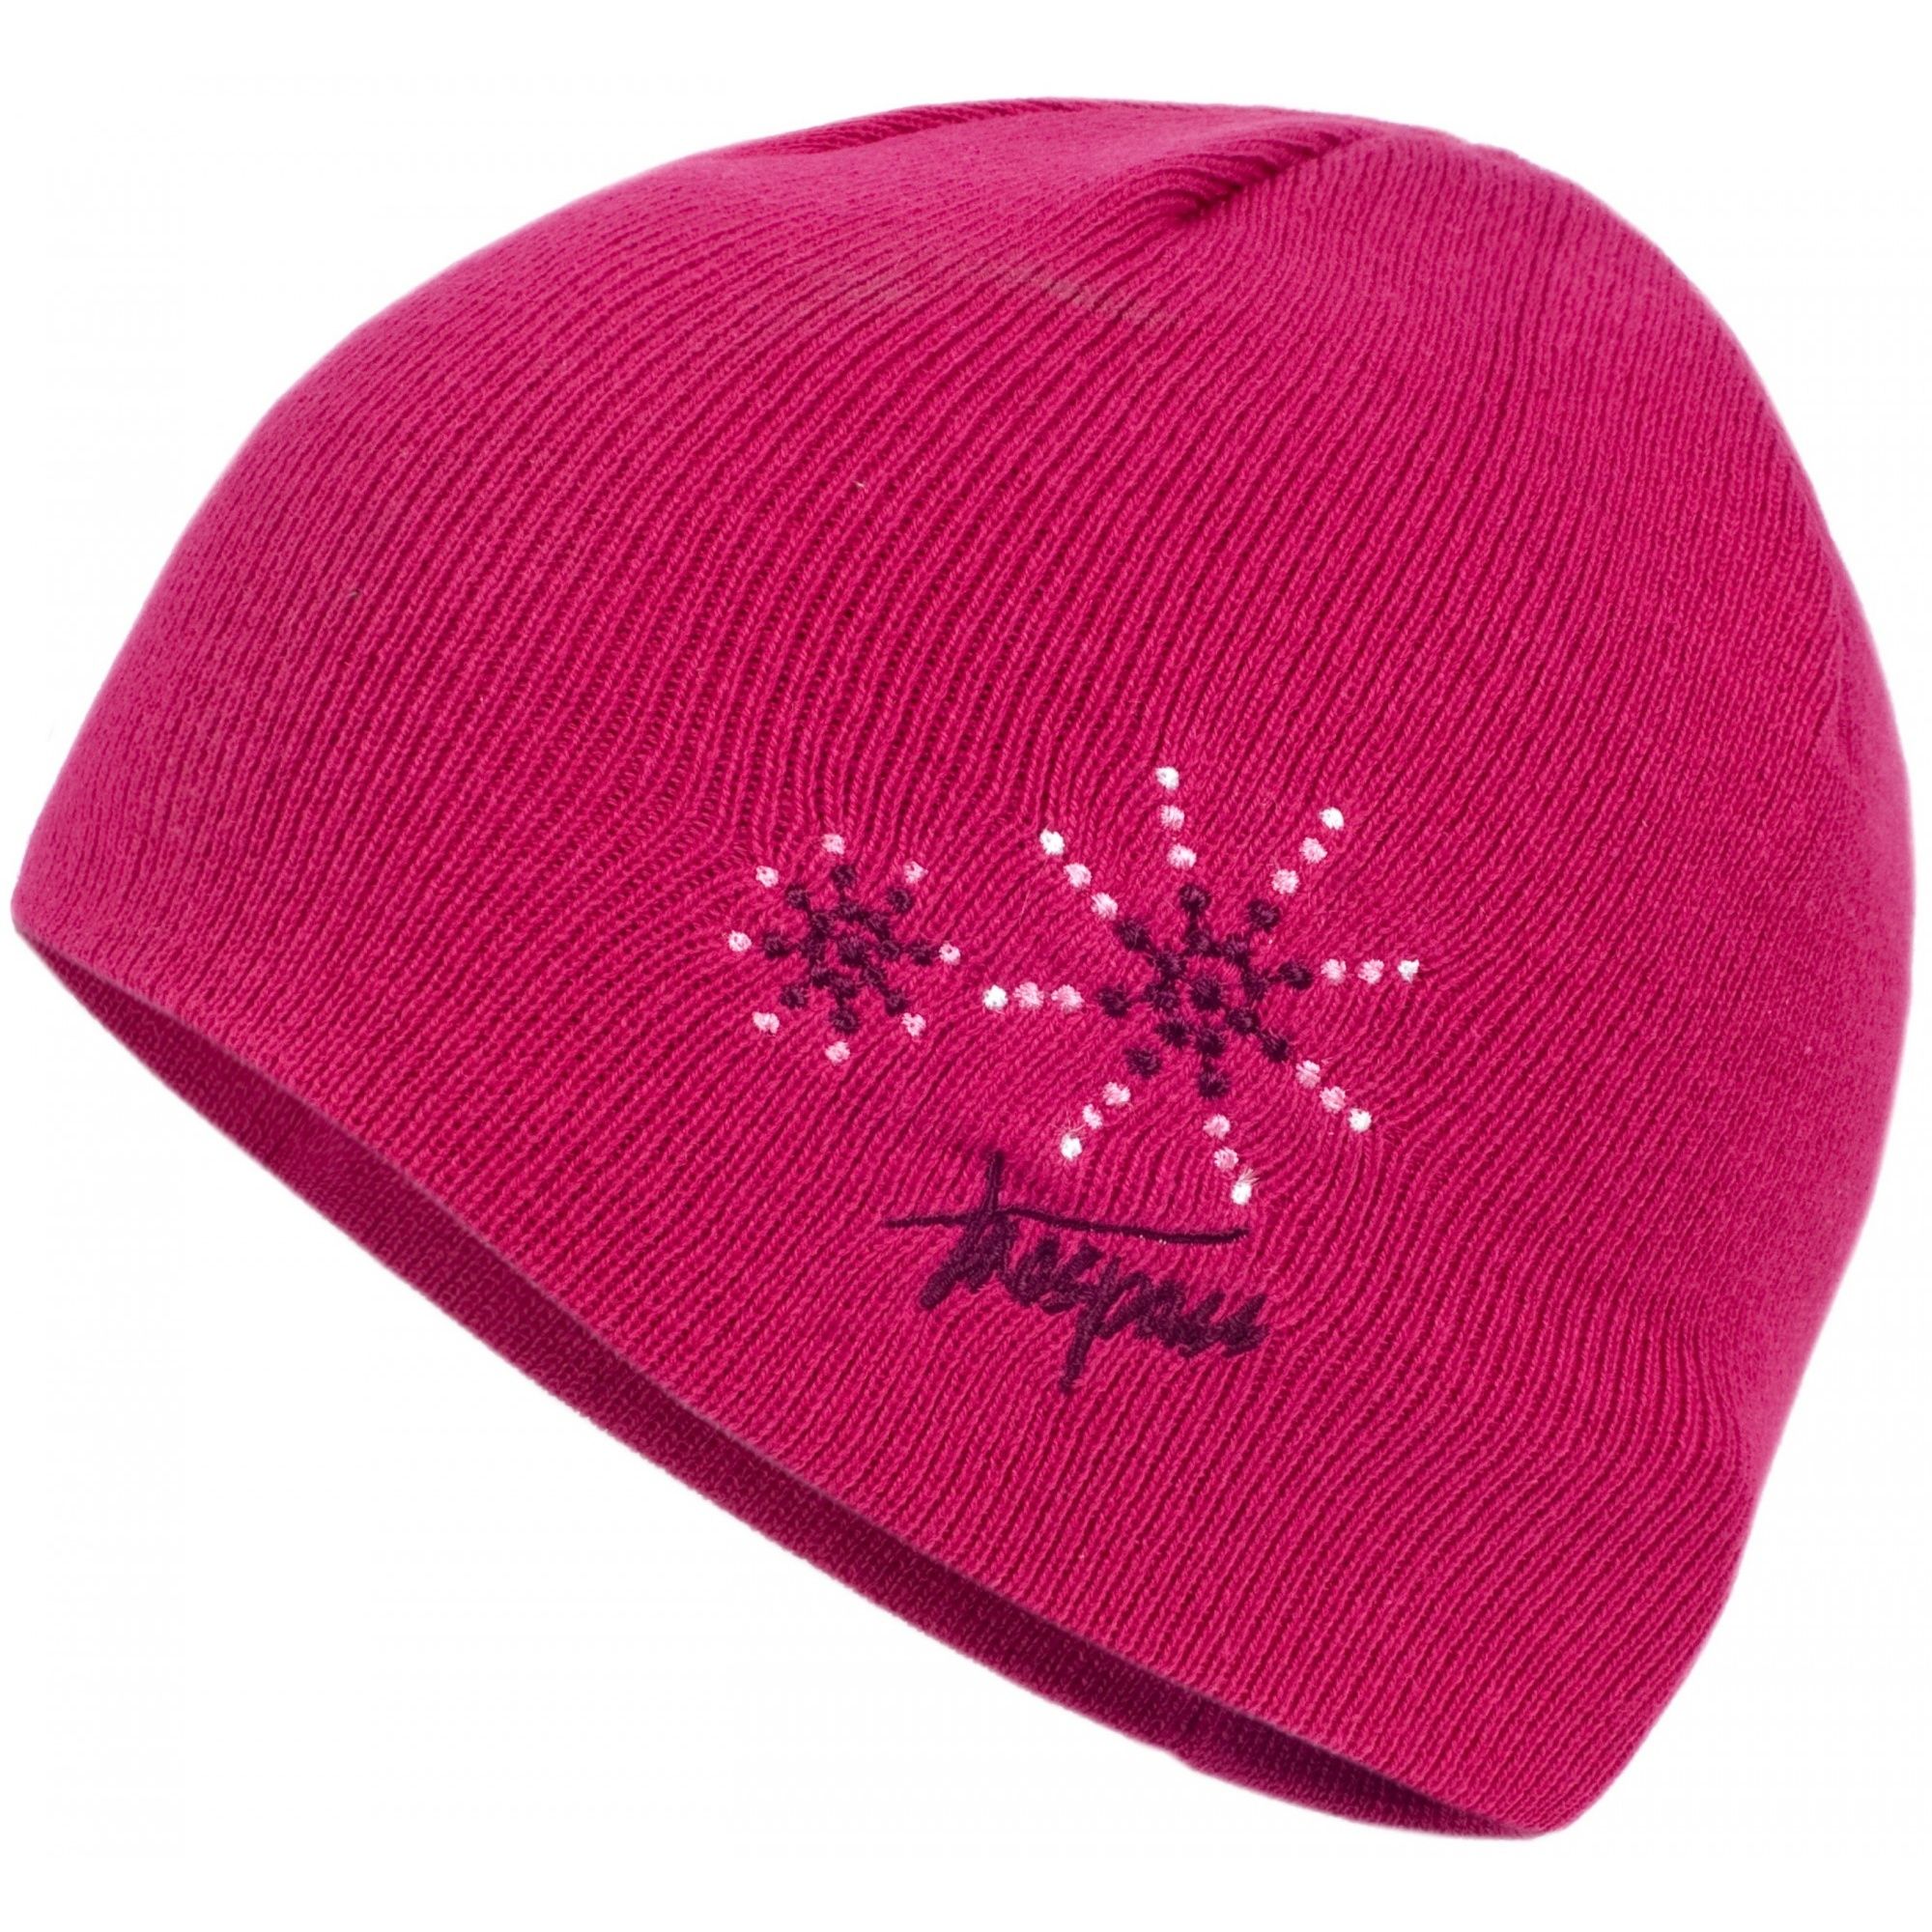 Girls knitted beanie hat. Embroidered detail. Shell: 100% acrylic. Lining: double walled.